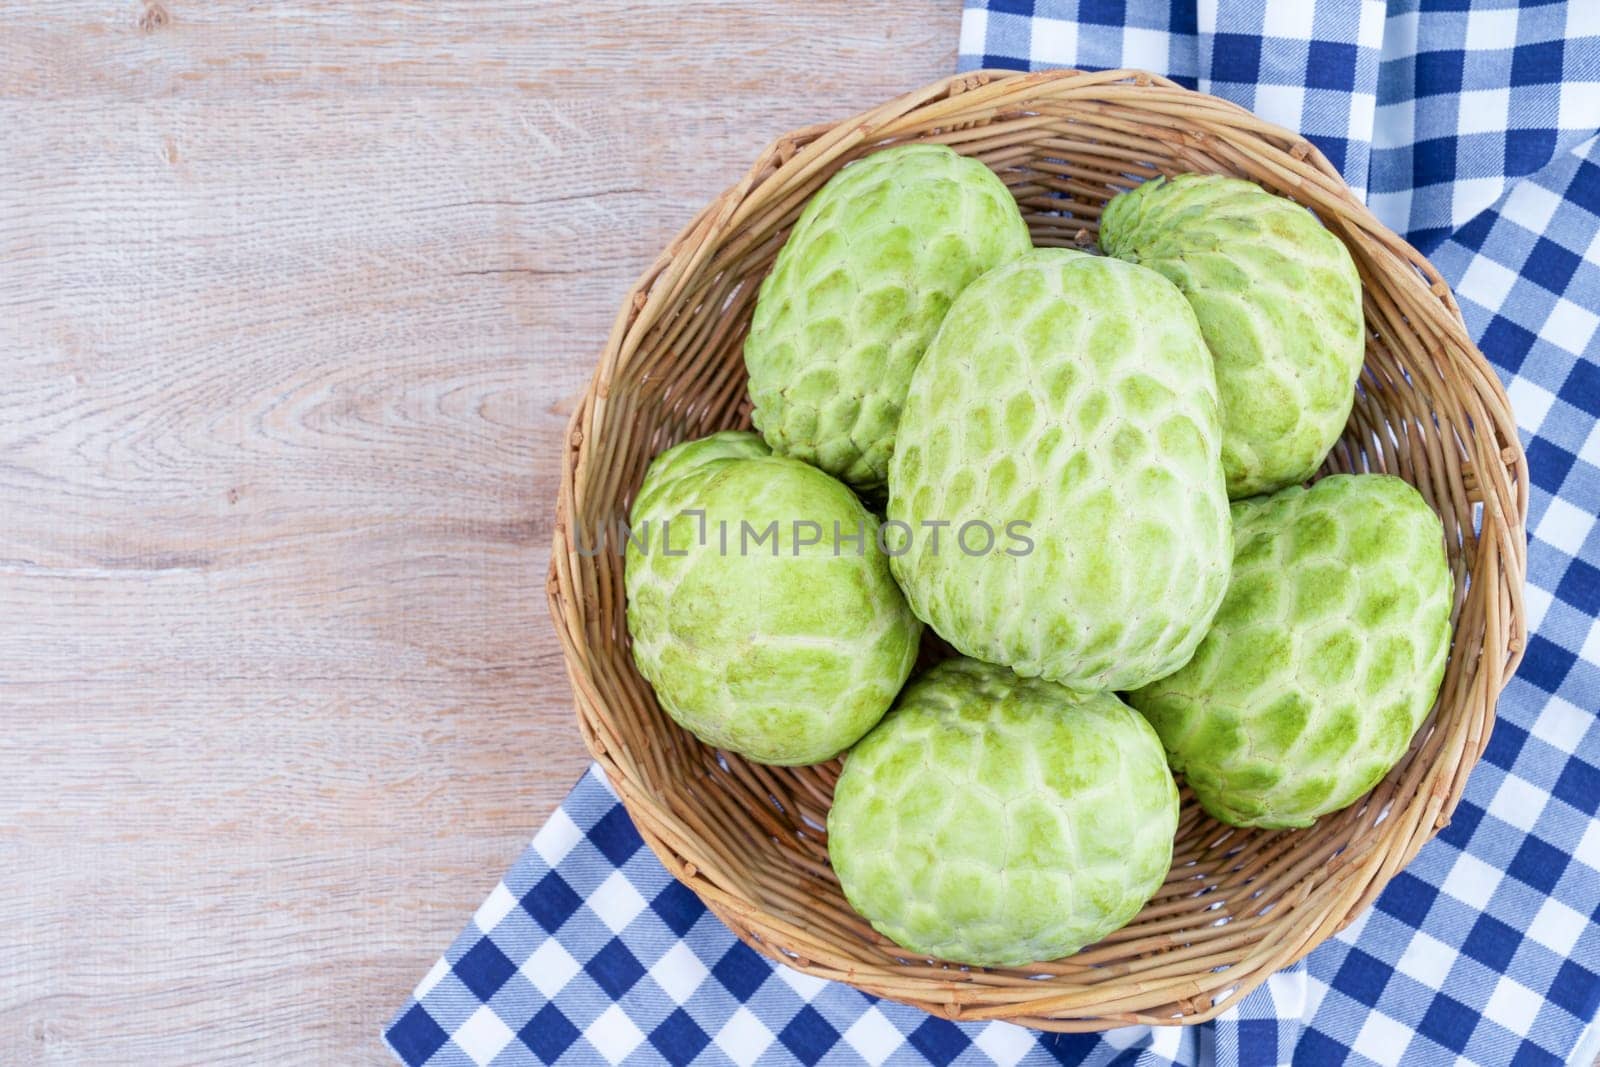 The Sugar apples or custard apples in a wooden weave basket on wooden table. by Gamjai